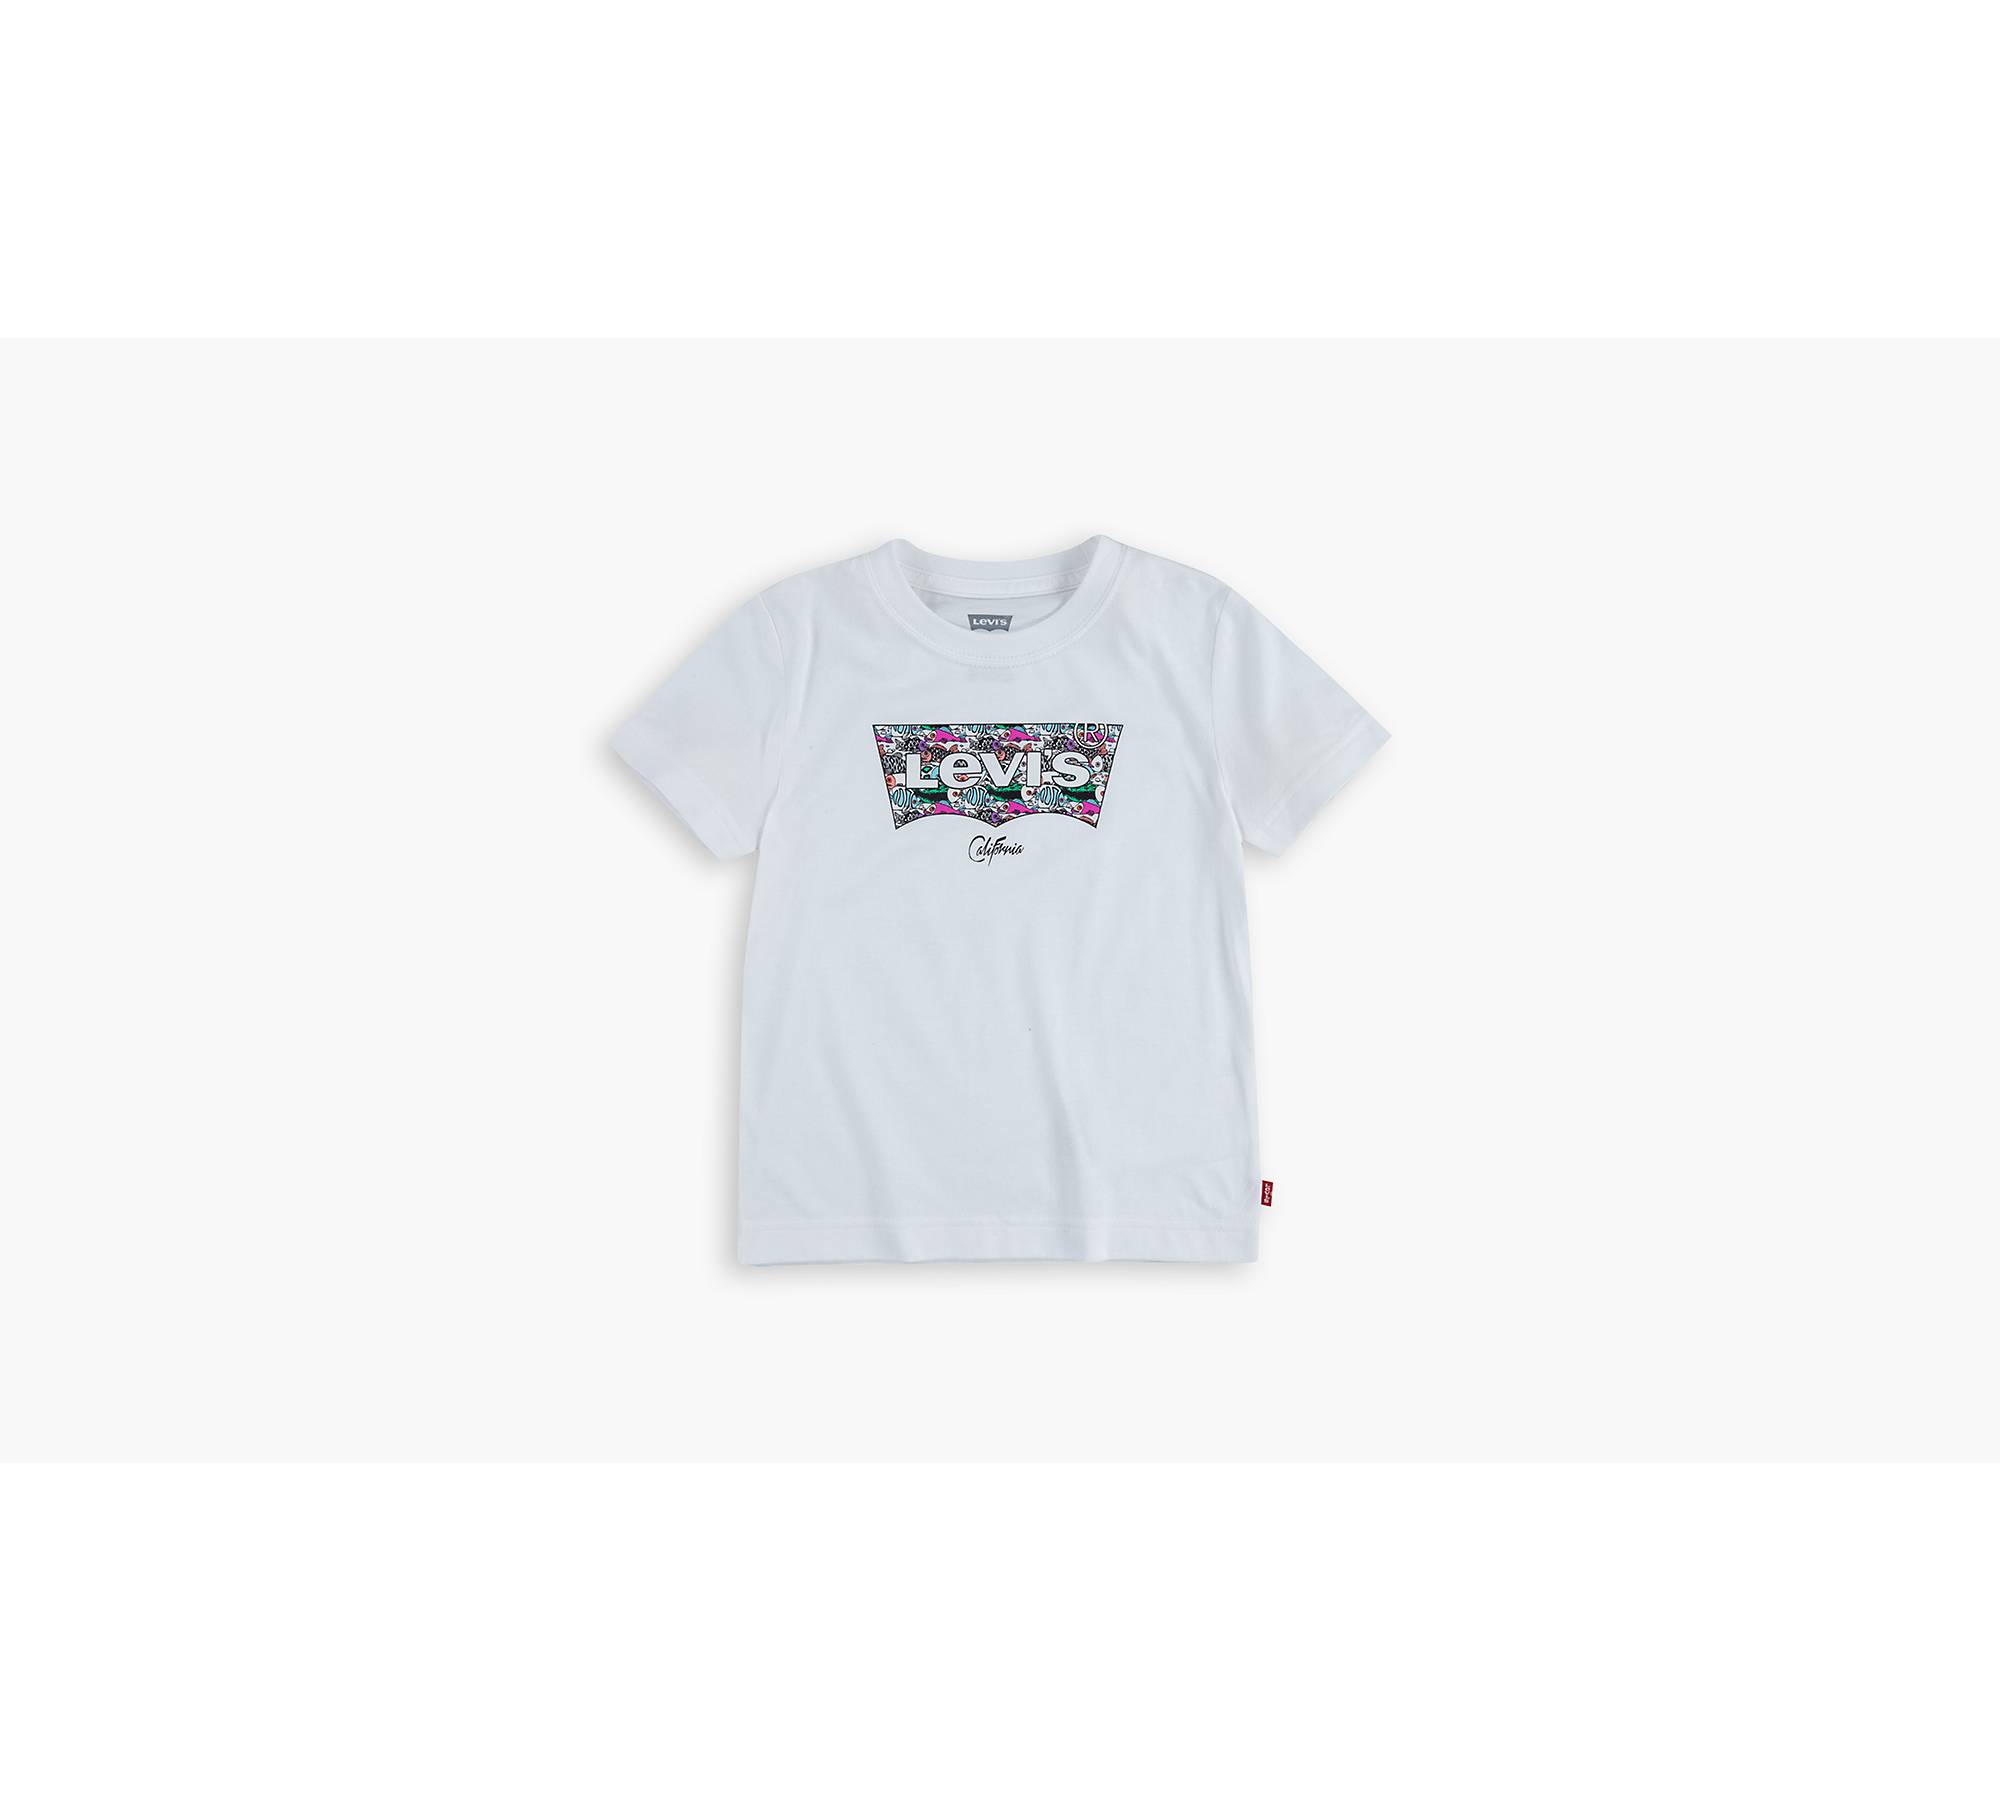 Toddler Boys 2t-4t Graphic Tee Shirt - White | Levi's® US